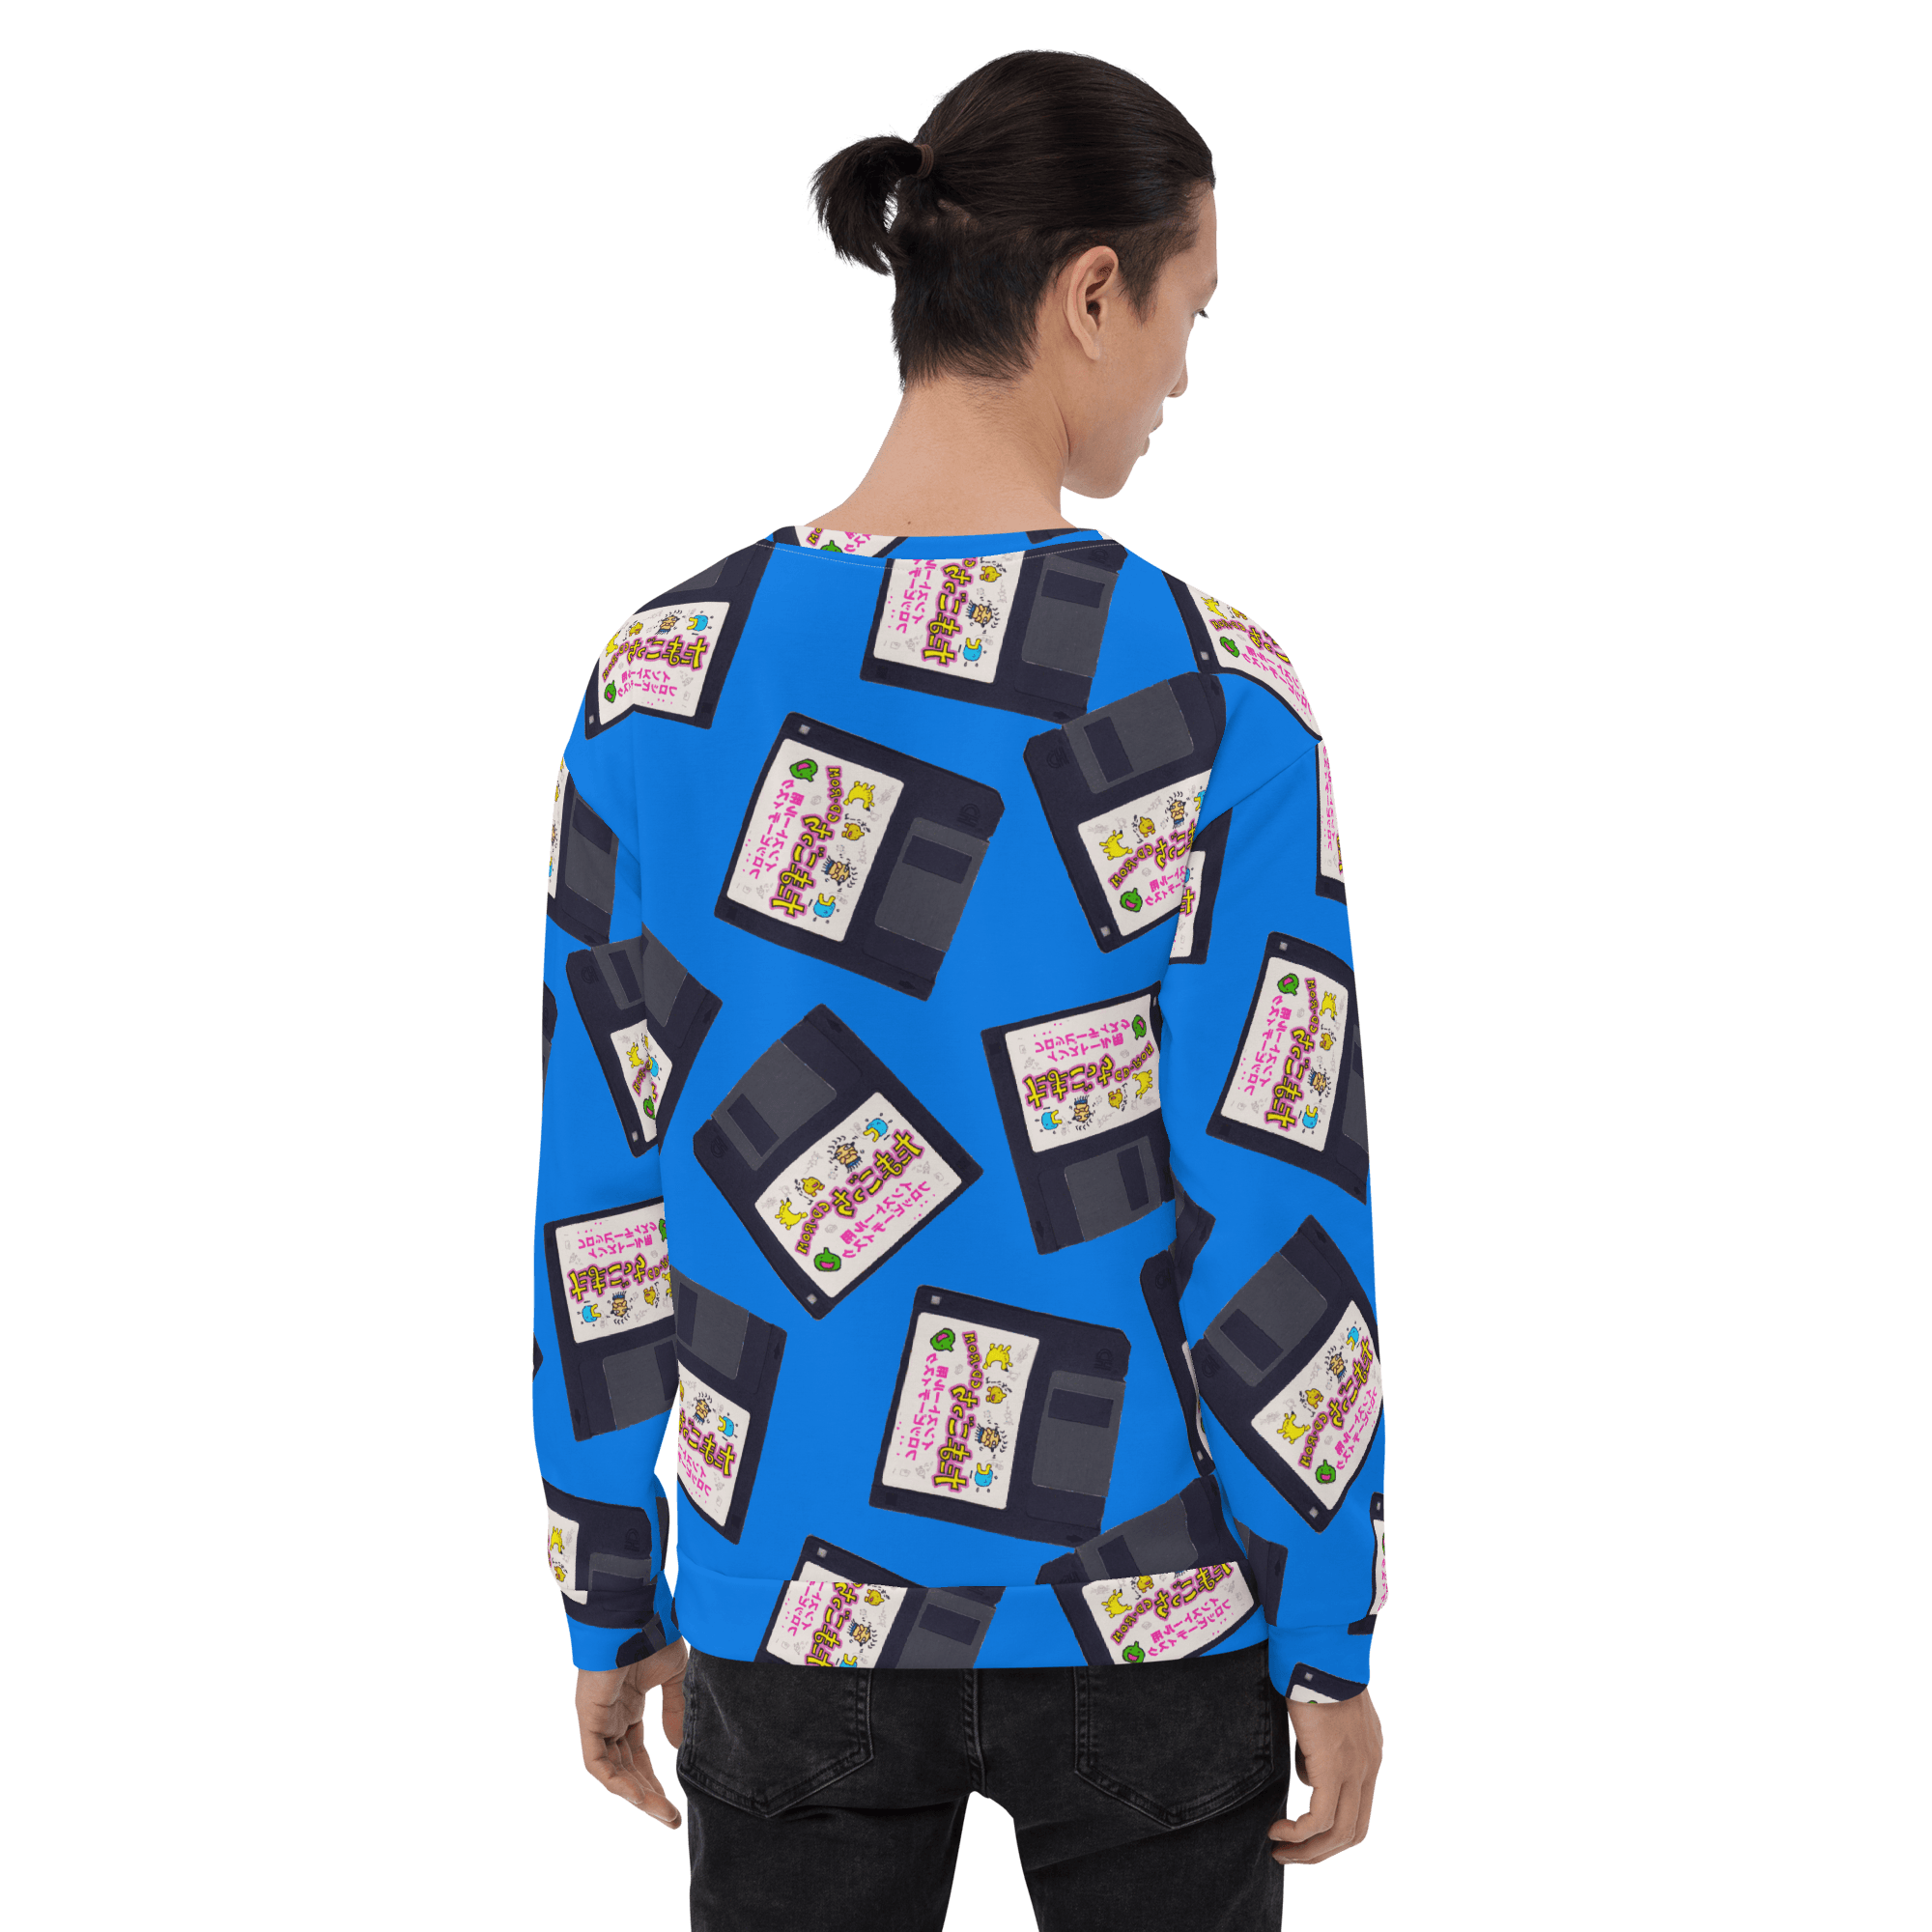 Diskettes Blue® Deluxe Sweatshirt (only 10 on sale) - Kikillo Club